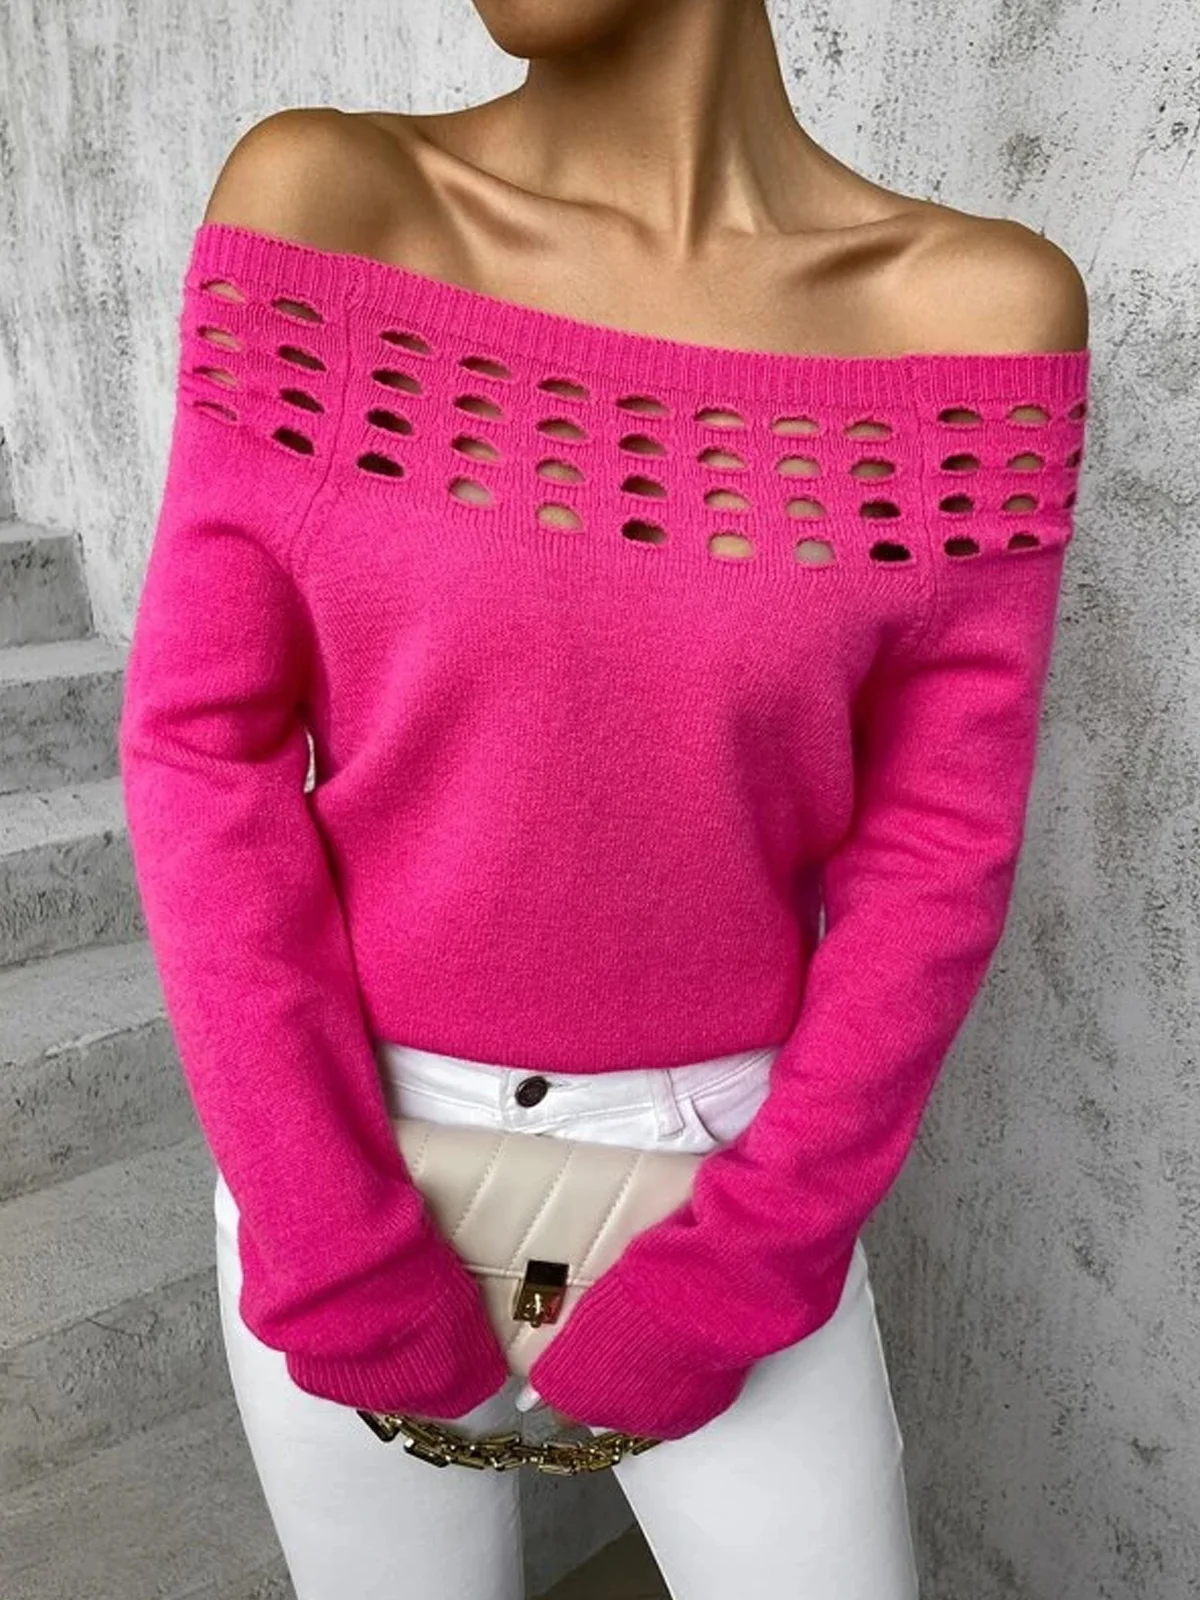 Crew Neck Plain Hollow Out Casual Pink Sweater Valentine's Day Top